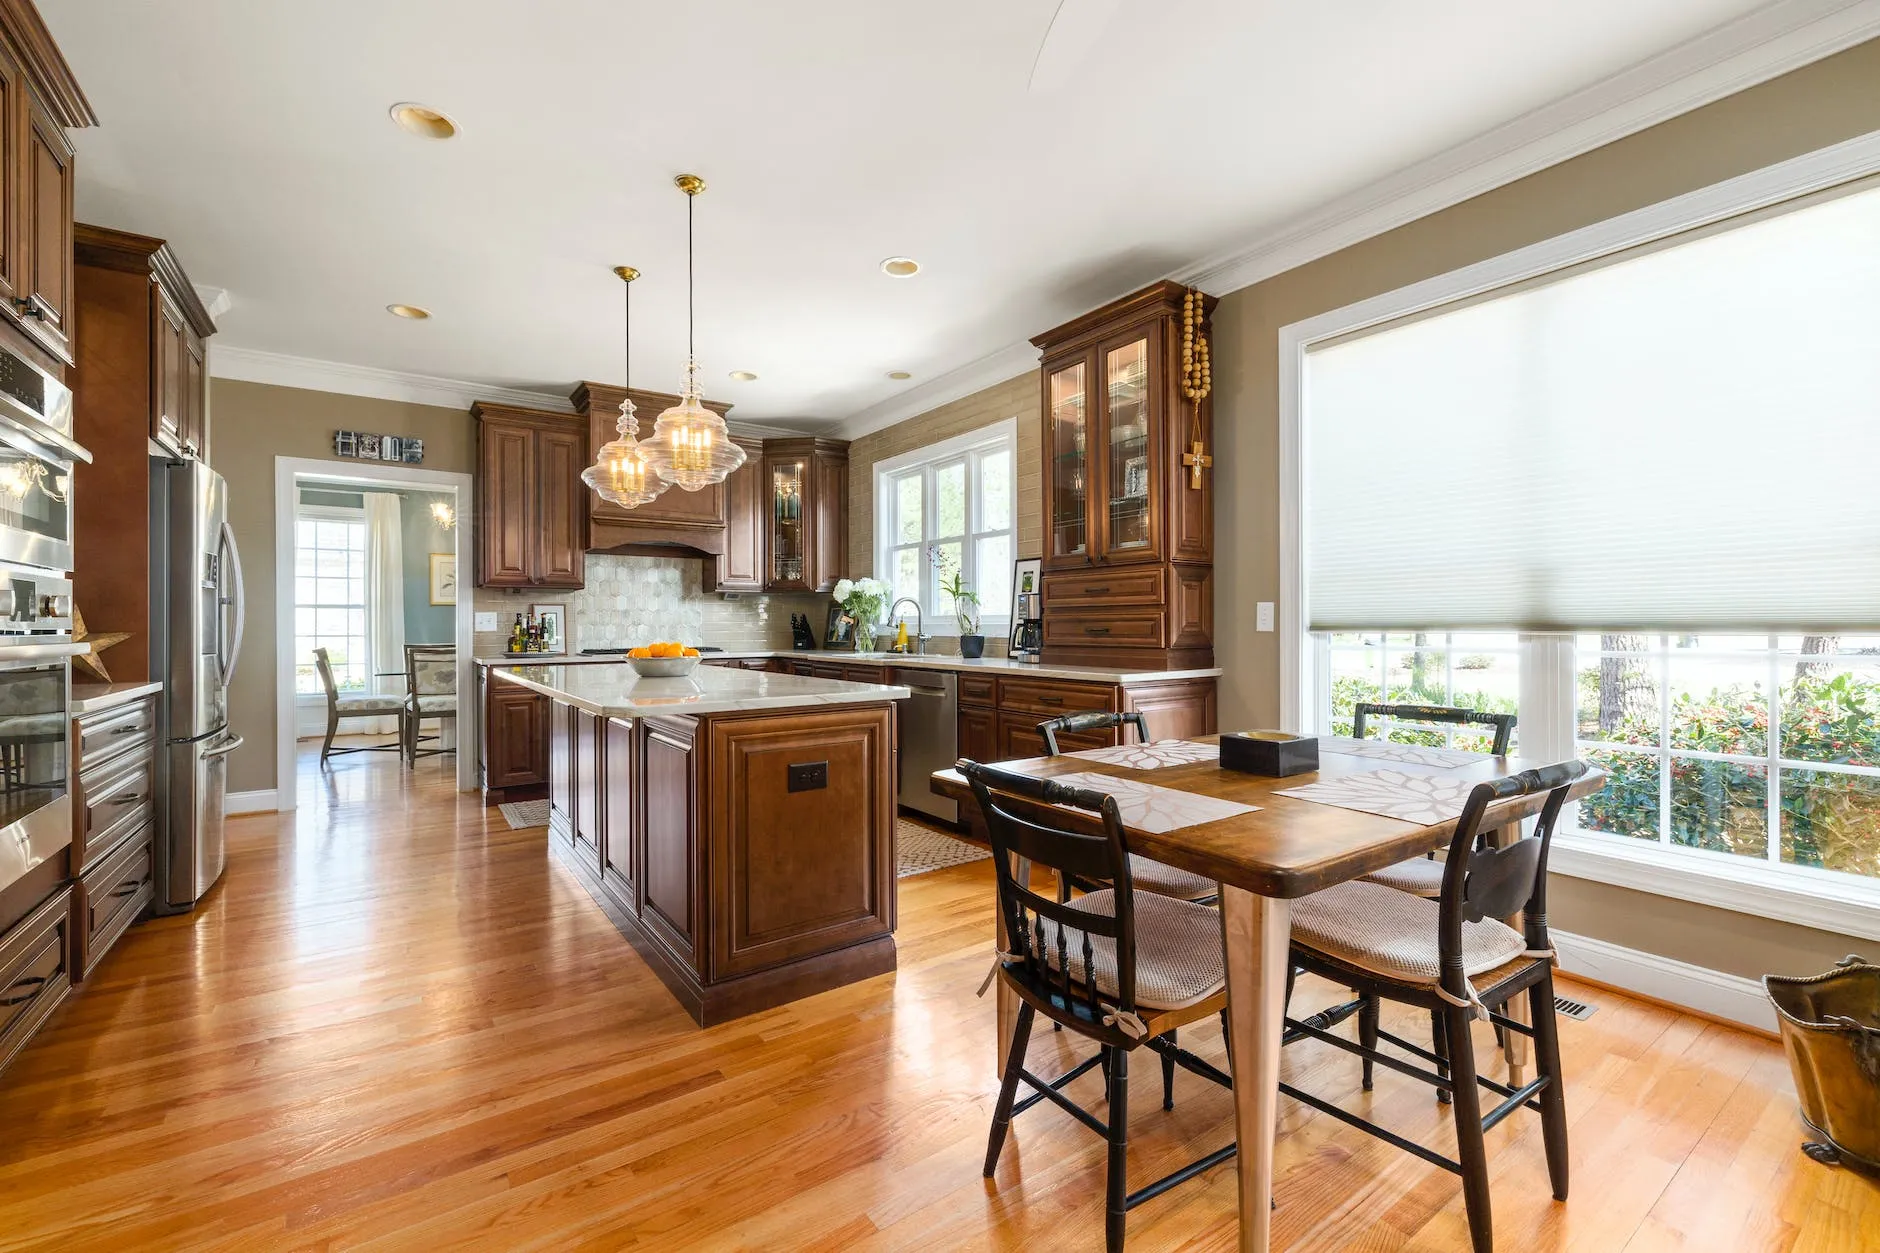 What Factors Affect the Cost of Kitchen Cabinets